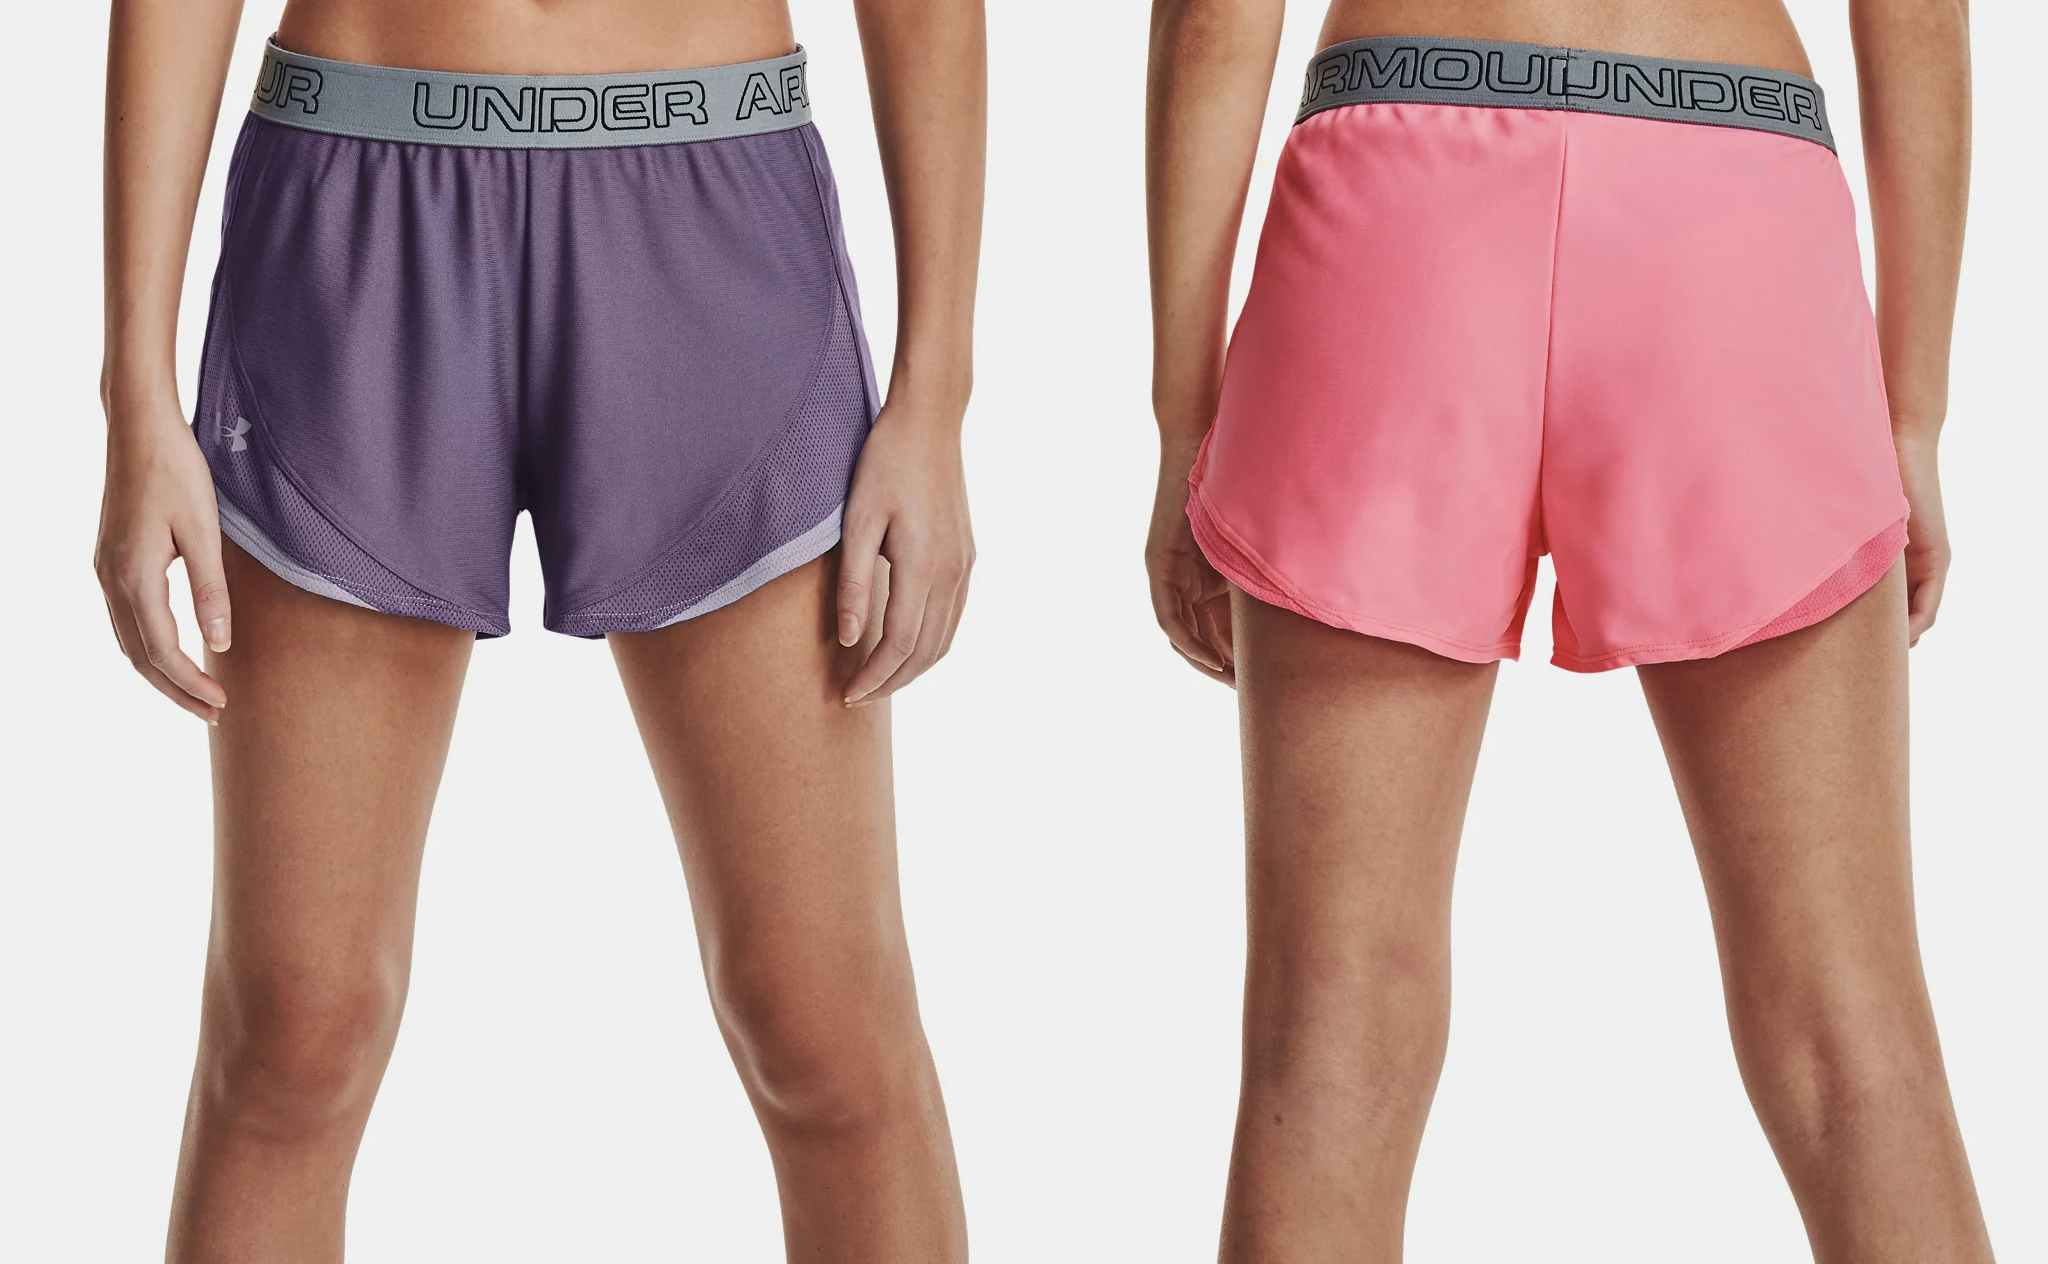 under armour sale shorts for women